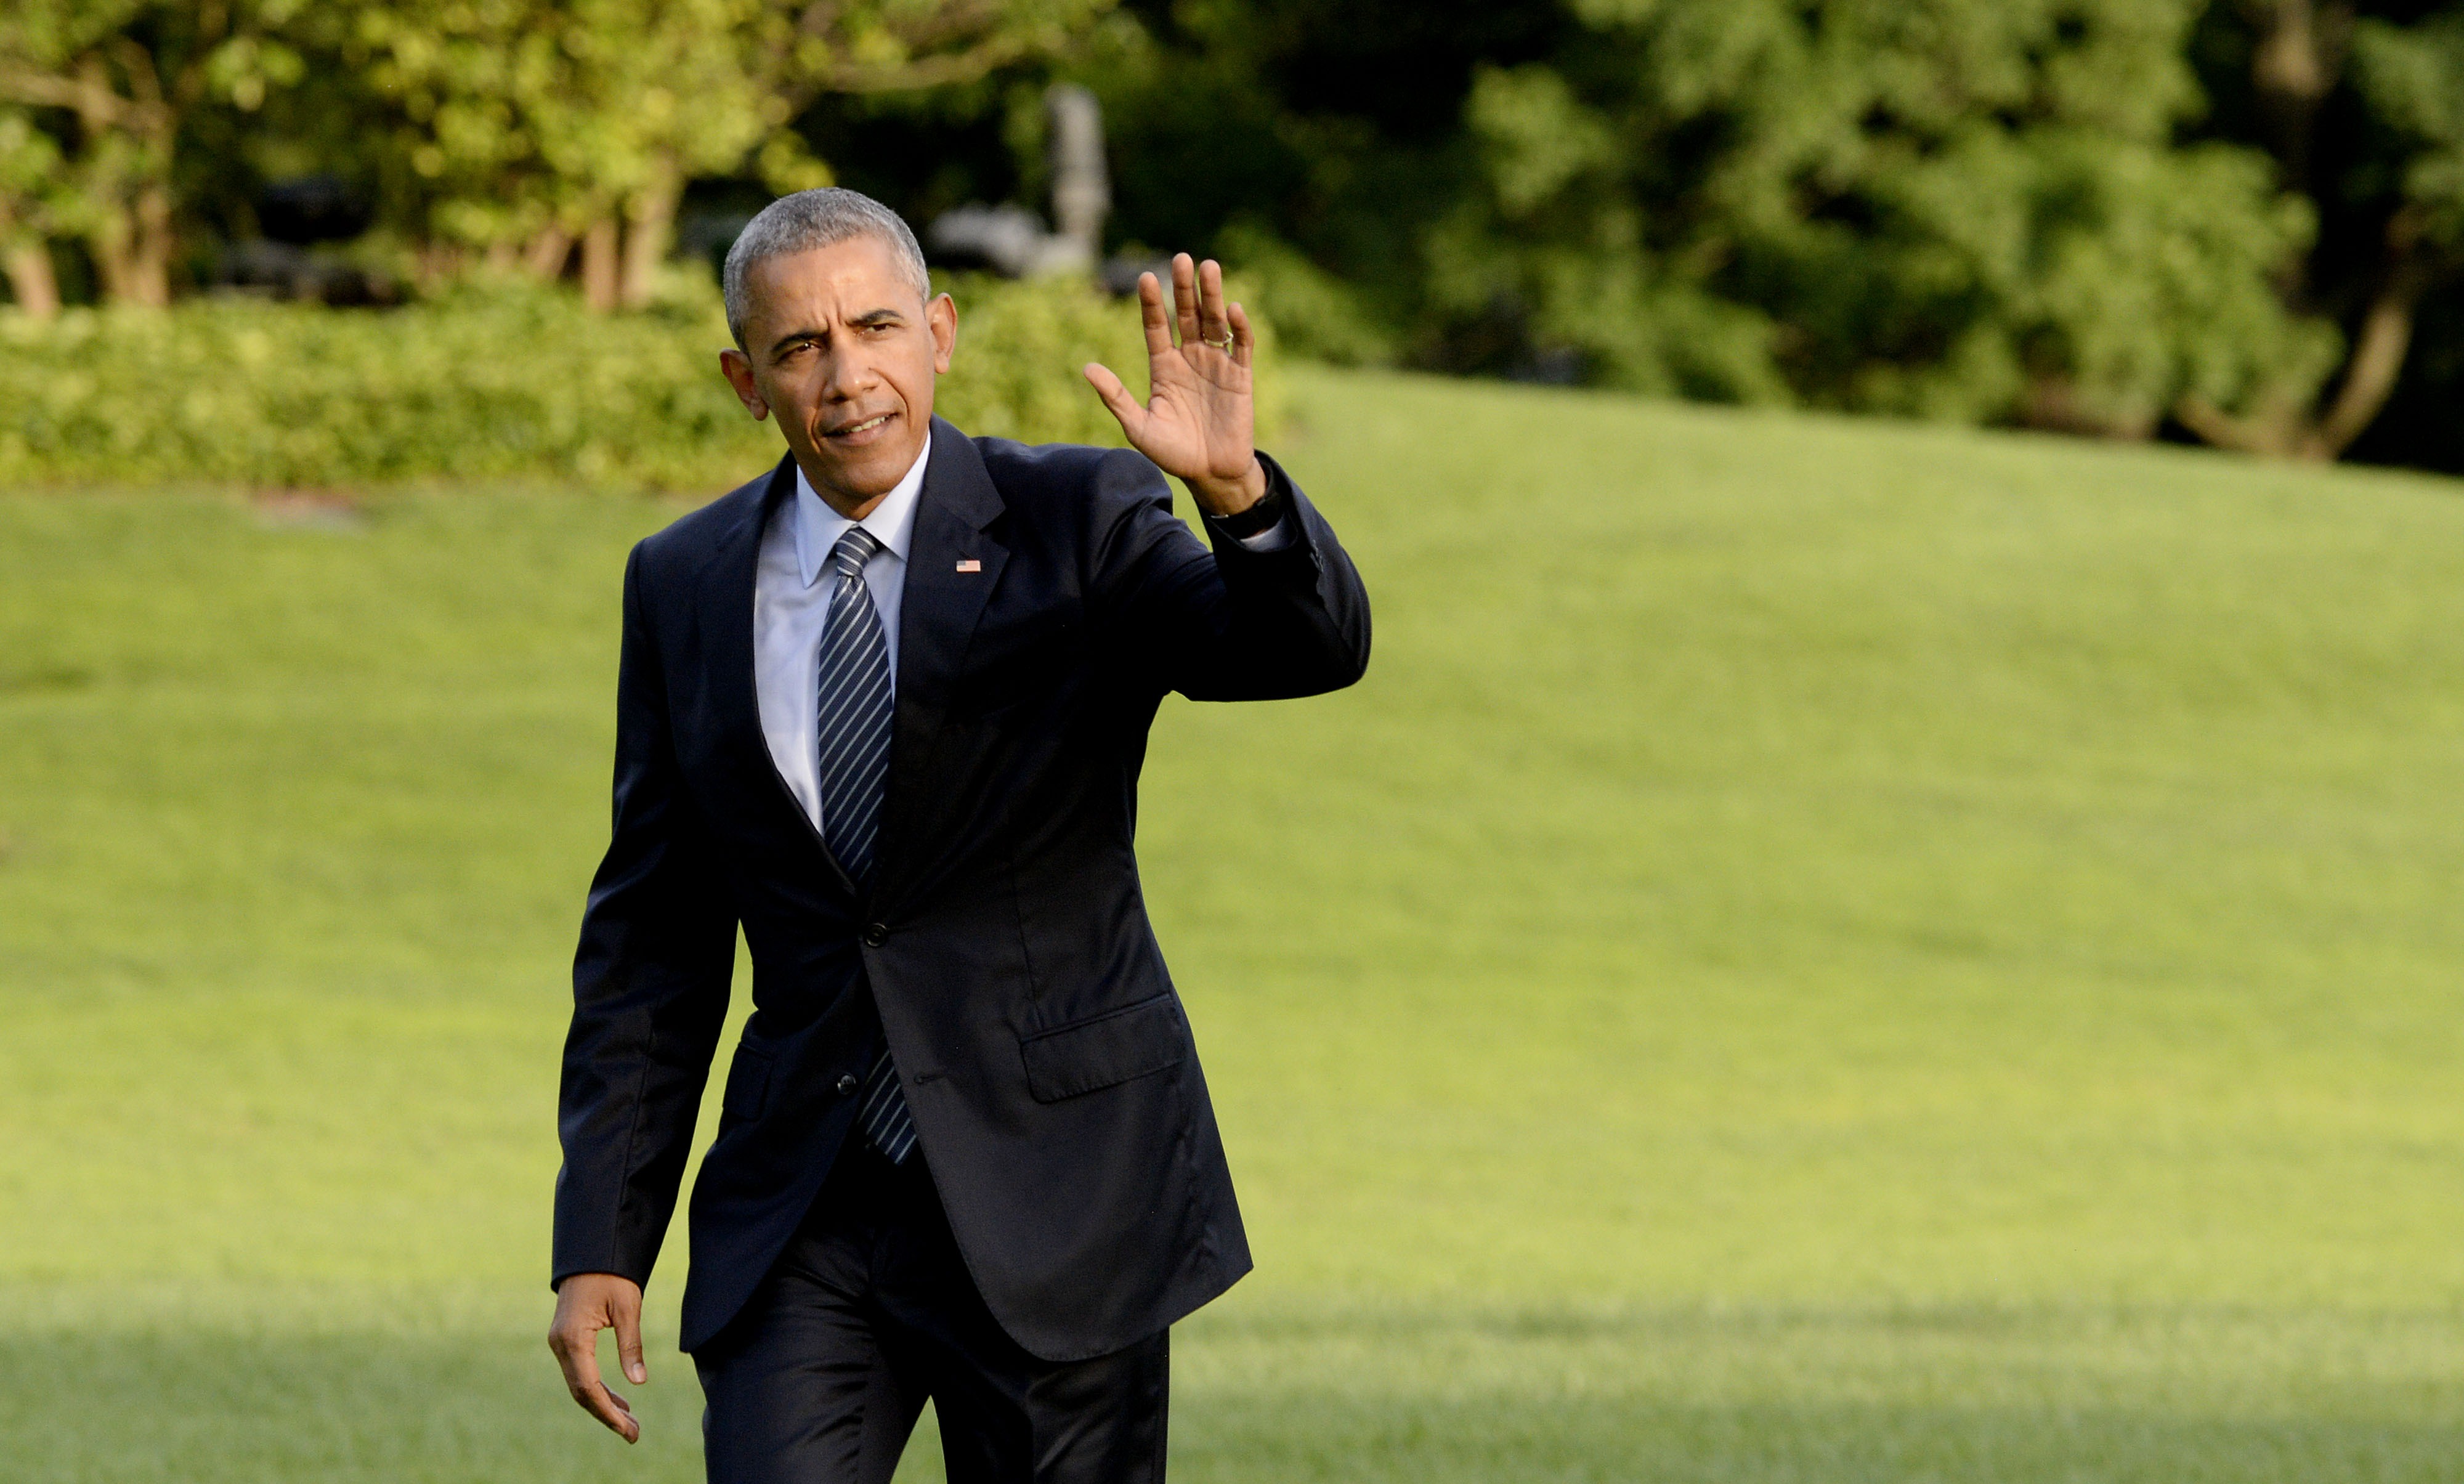 U.S. President Barack Obama waves upon returning to the White House July 5, 2016 in Washington, DC. (Olivier Douliery—Pool/Getty Images)